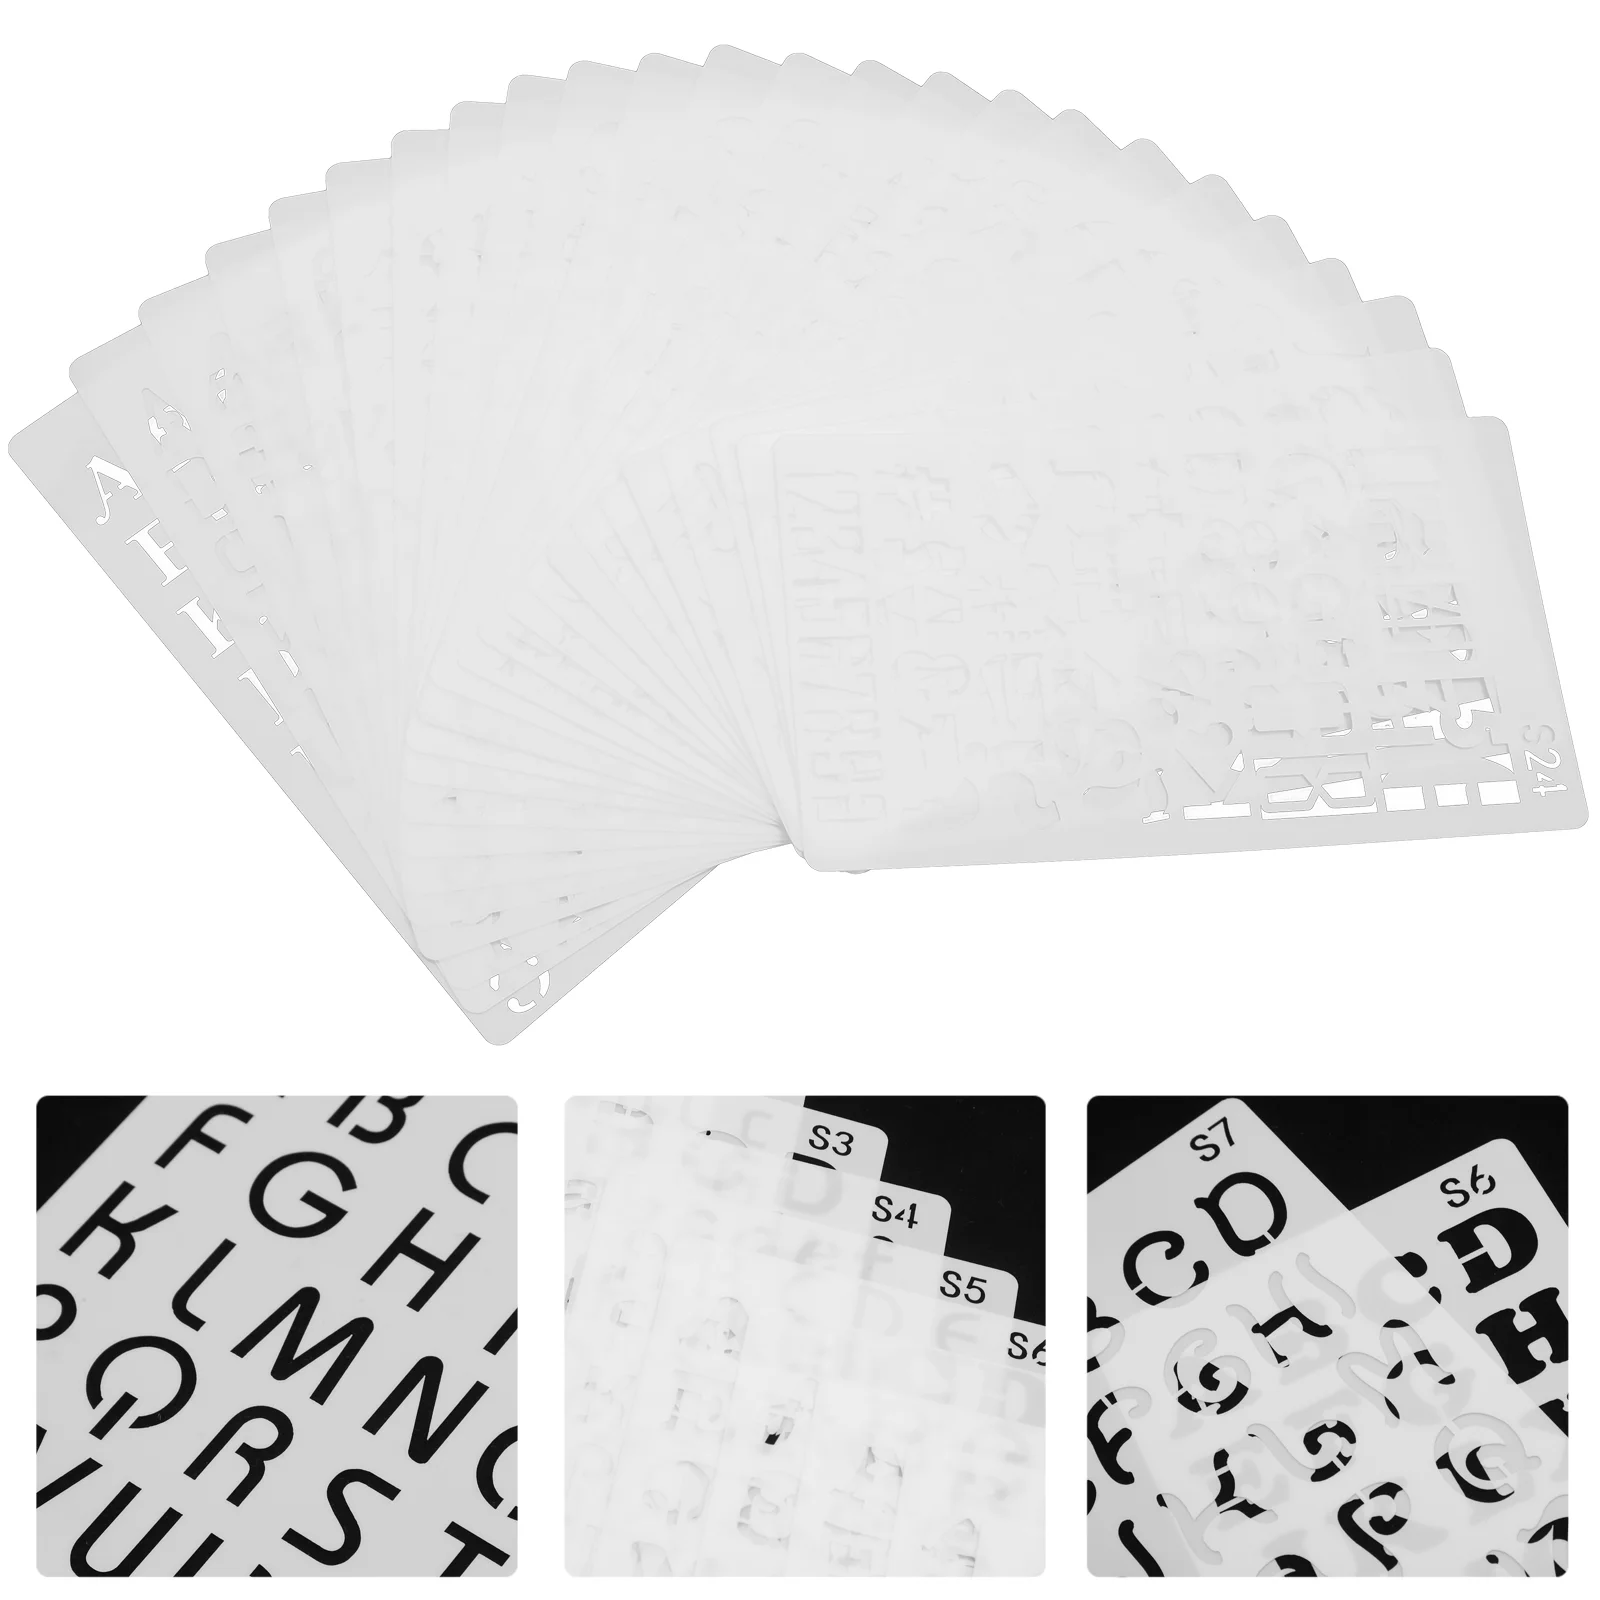 

24PCS Hollow Painting Alphanumeric Template Stencil Alphabet Letter Number Planner Set Stencils Journal Notebook Diary